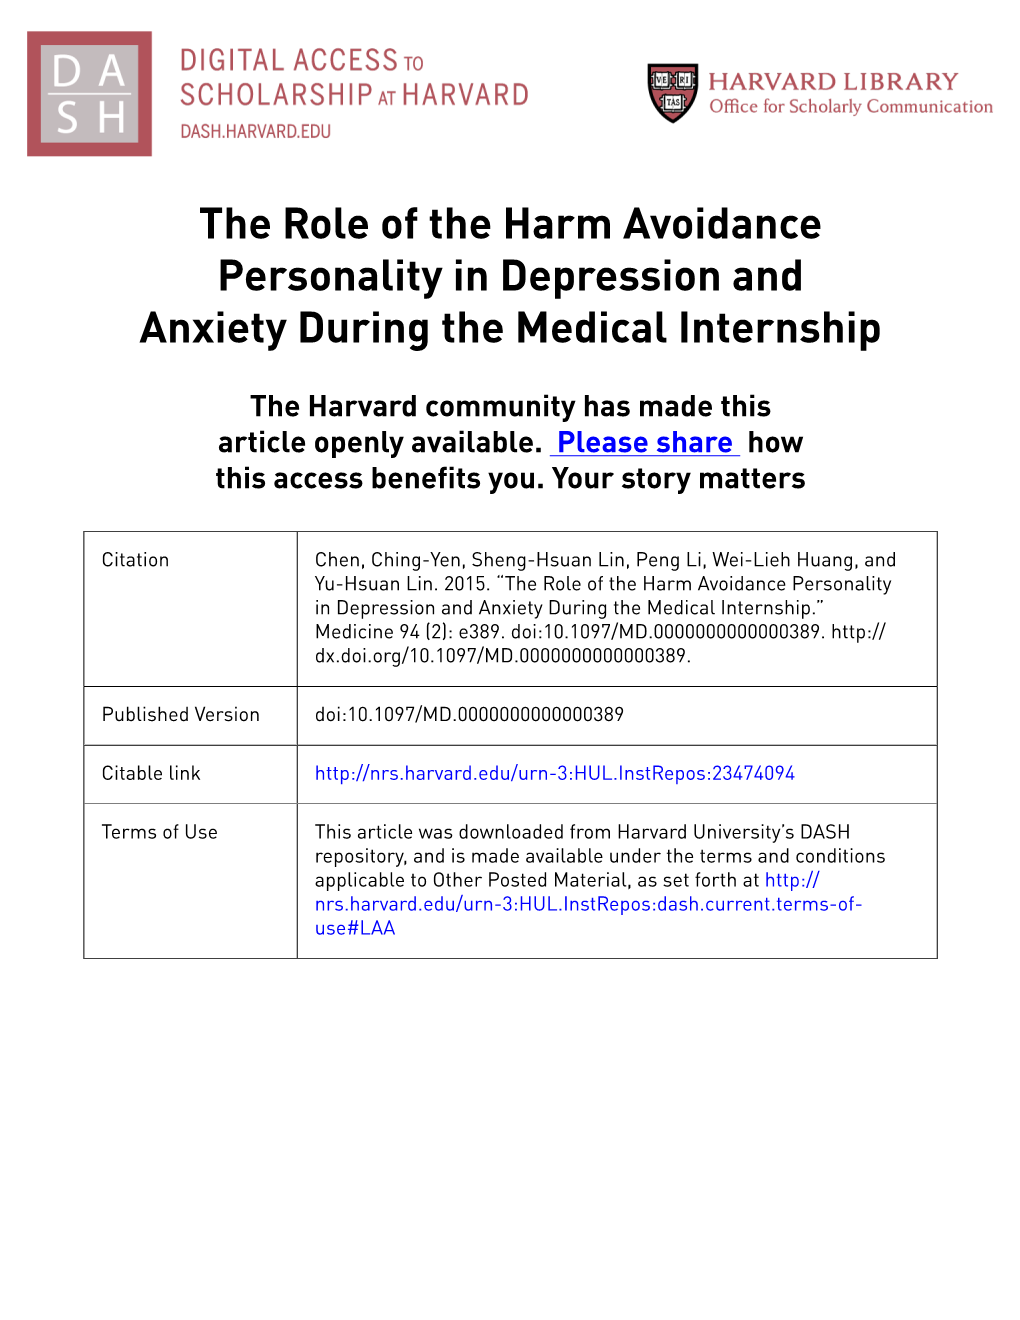 The Role of the Harm Avoidance Personality in Depression and Anxiety During the Medical Internship